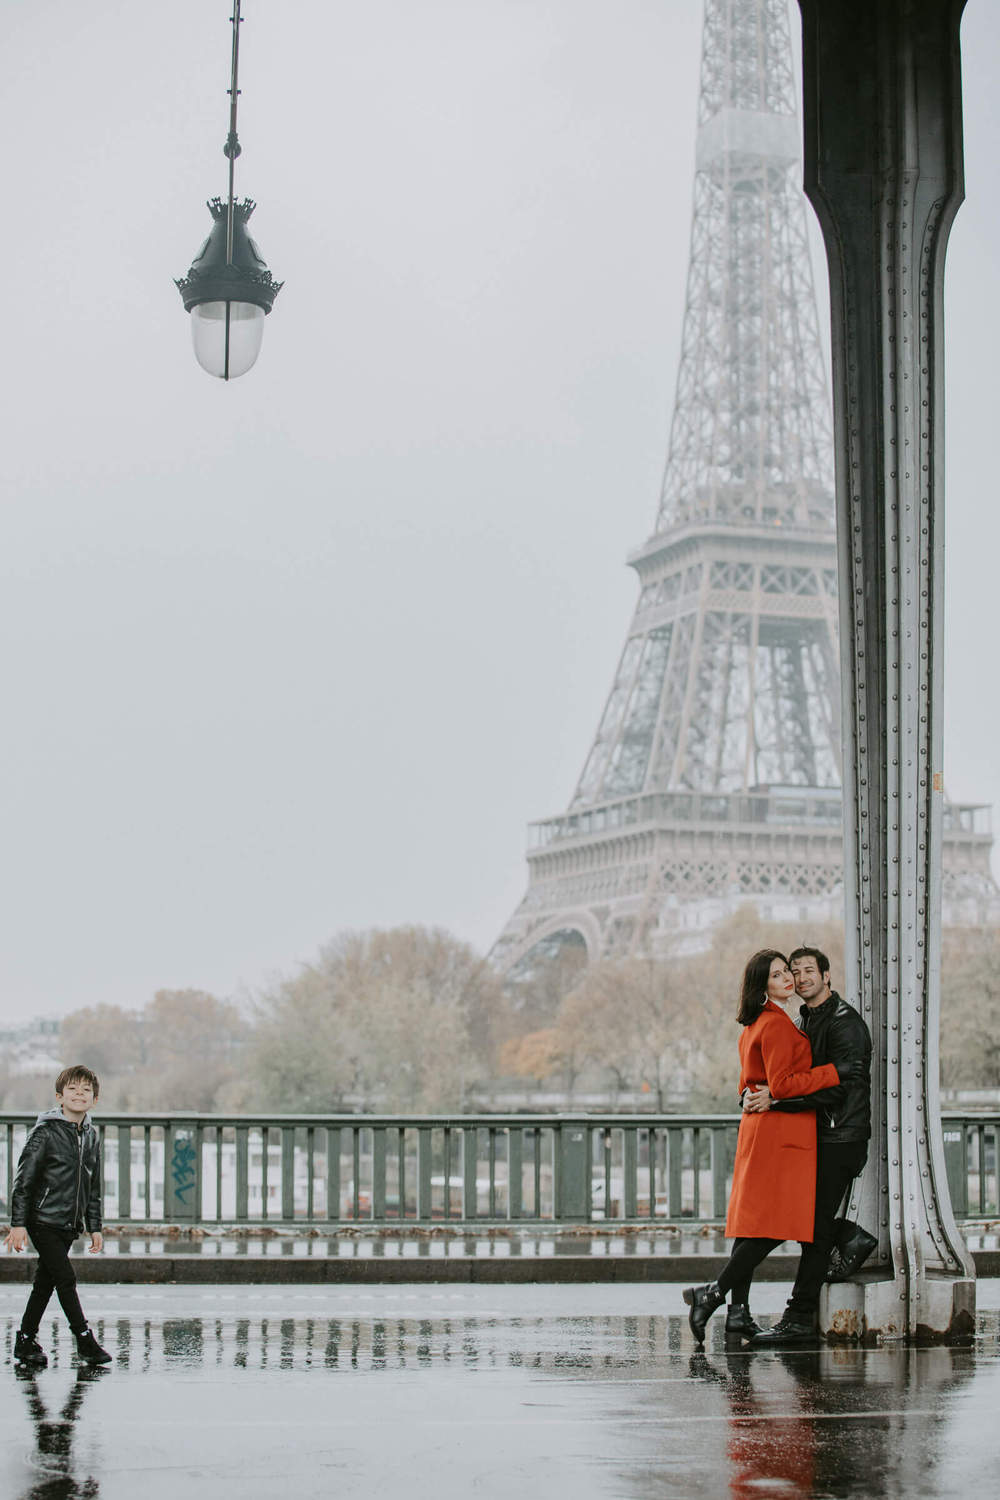 5 Tips For Taking Photos in Paris